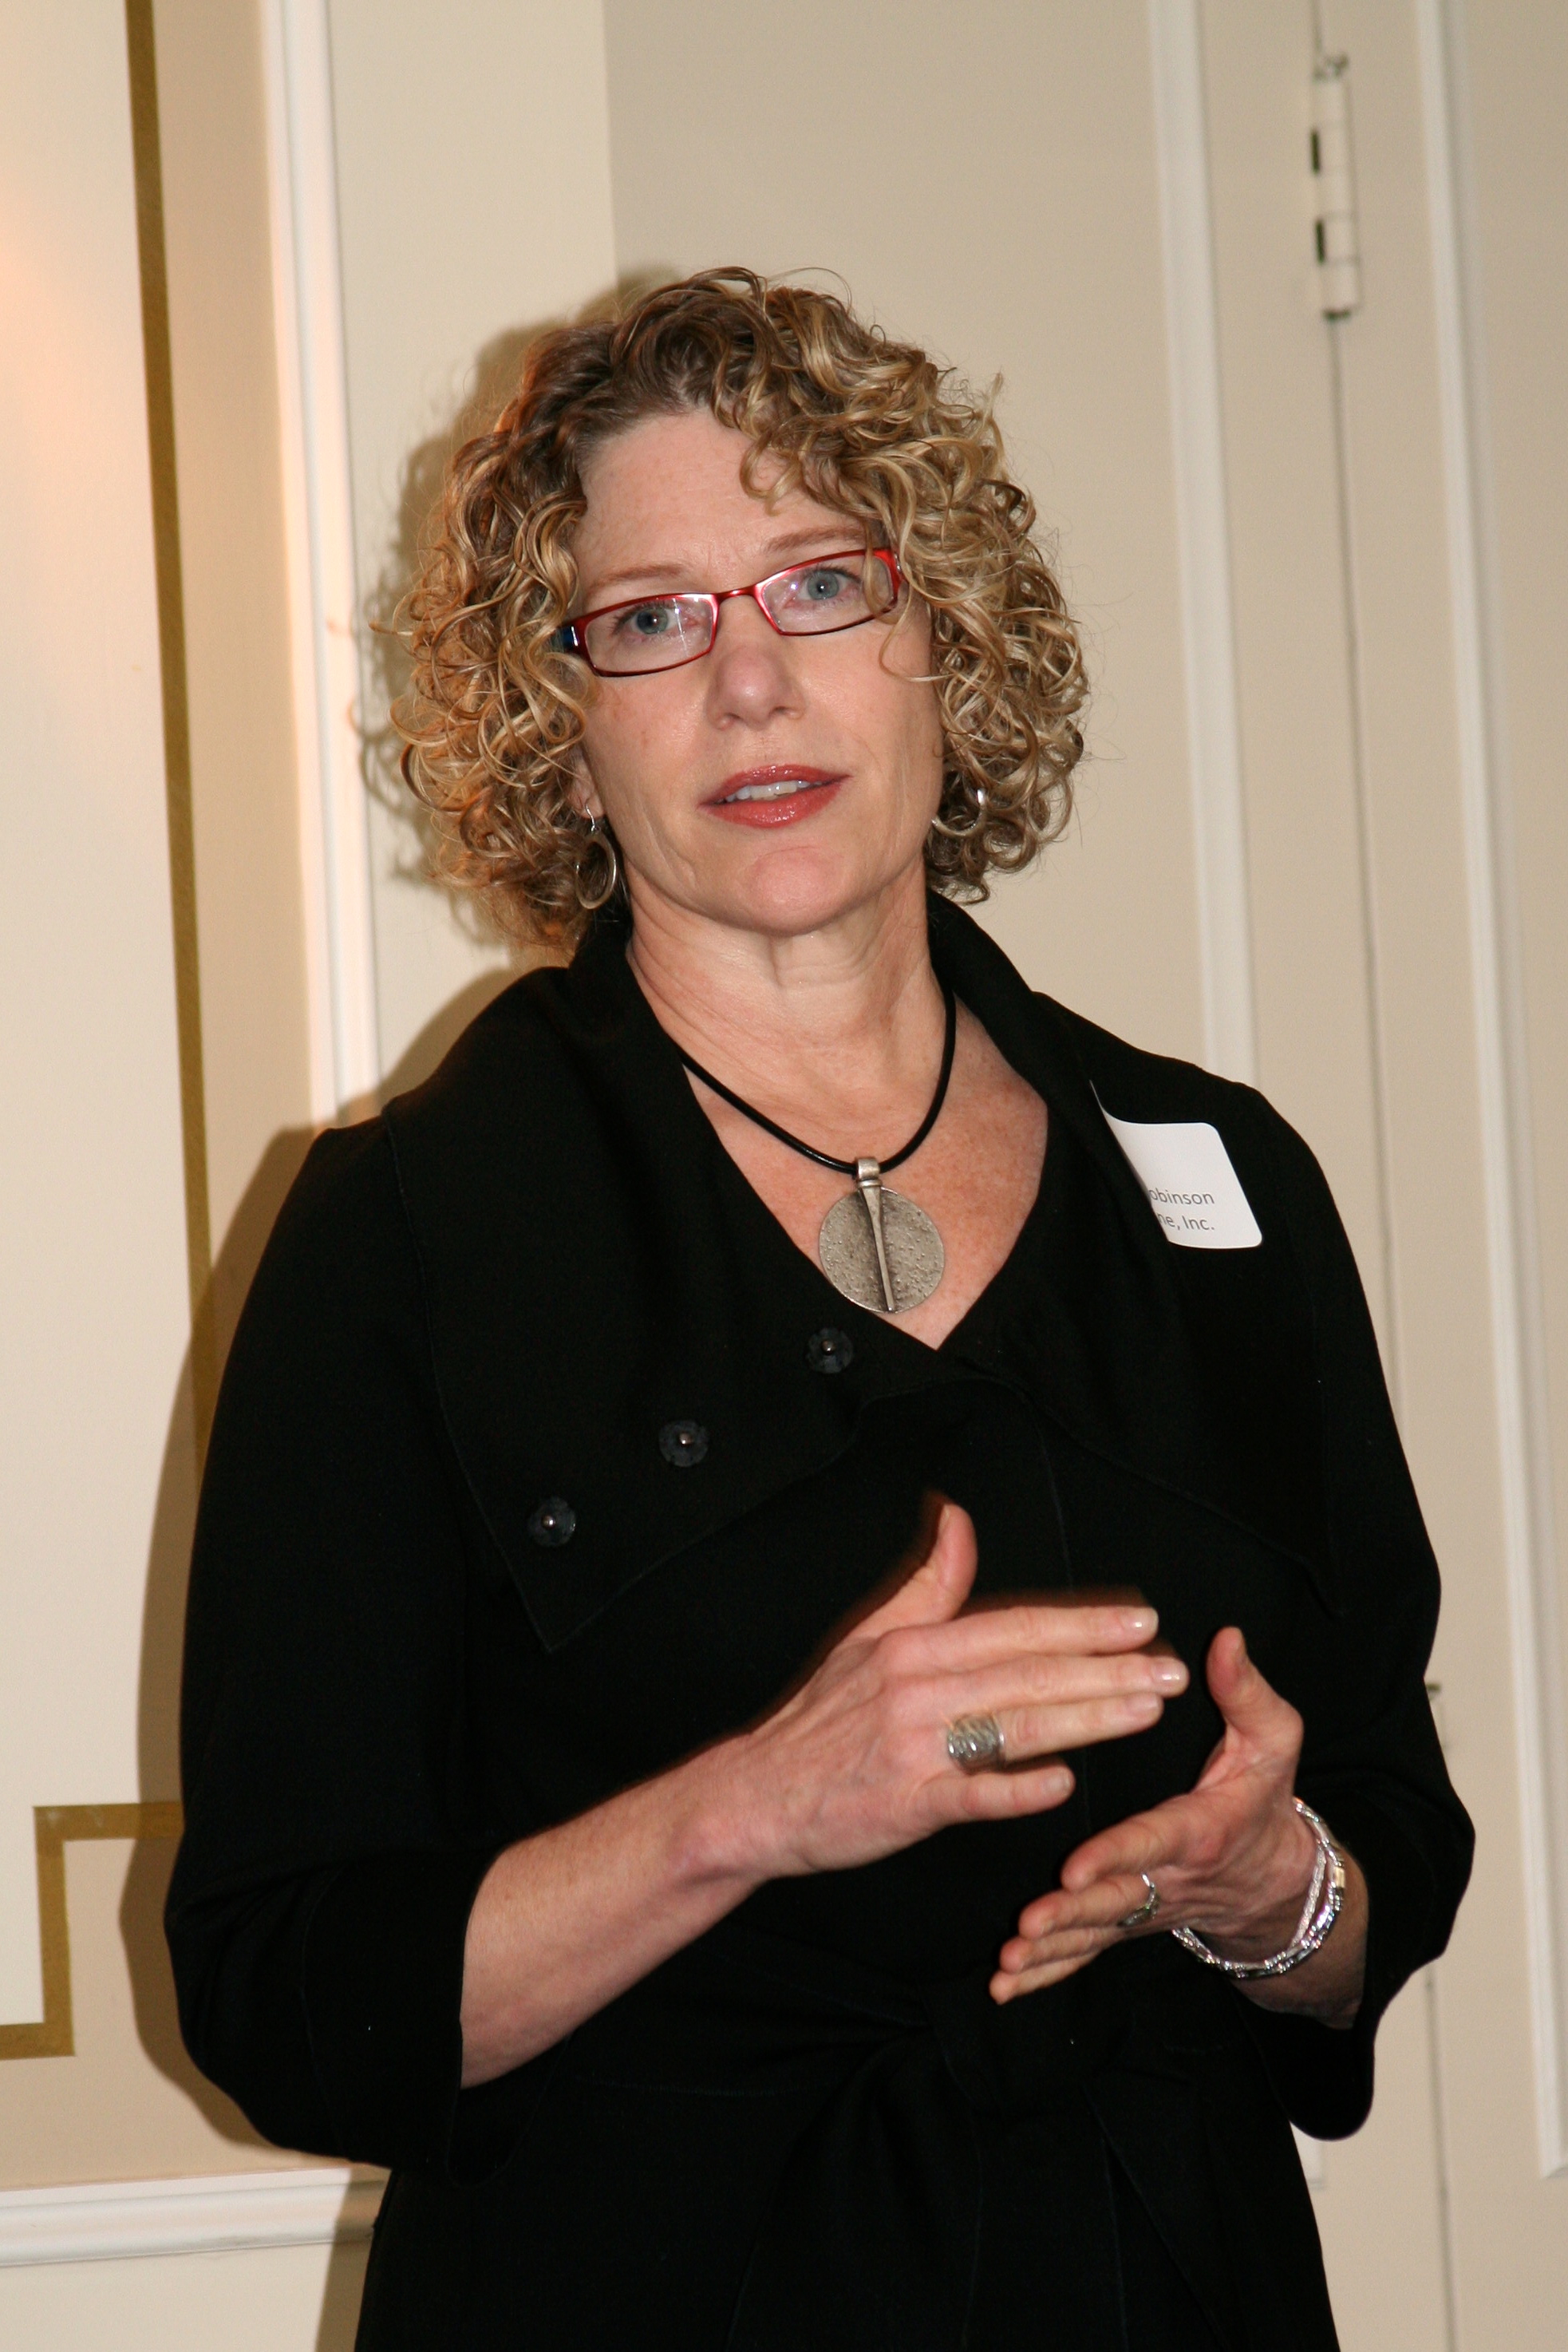 Mary Robinson, the Founder and Executive Director of Imagine, spoke to current and former trustees at the annual cornerstone meeting in December.   Imagine is a year-round grief support center for children and adults located in Westfield.  Imagine received a $15,000 grant in early 2012, which was ear marked as seed money for the start up of Imagine.